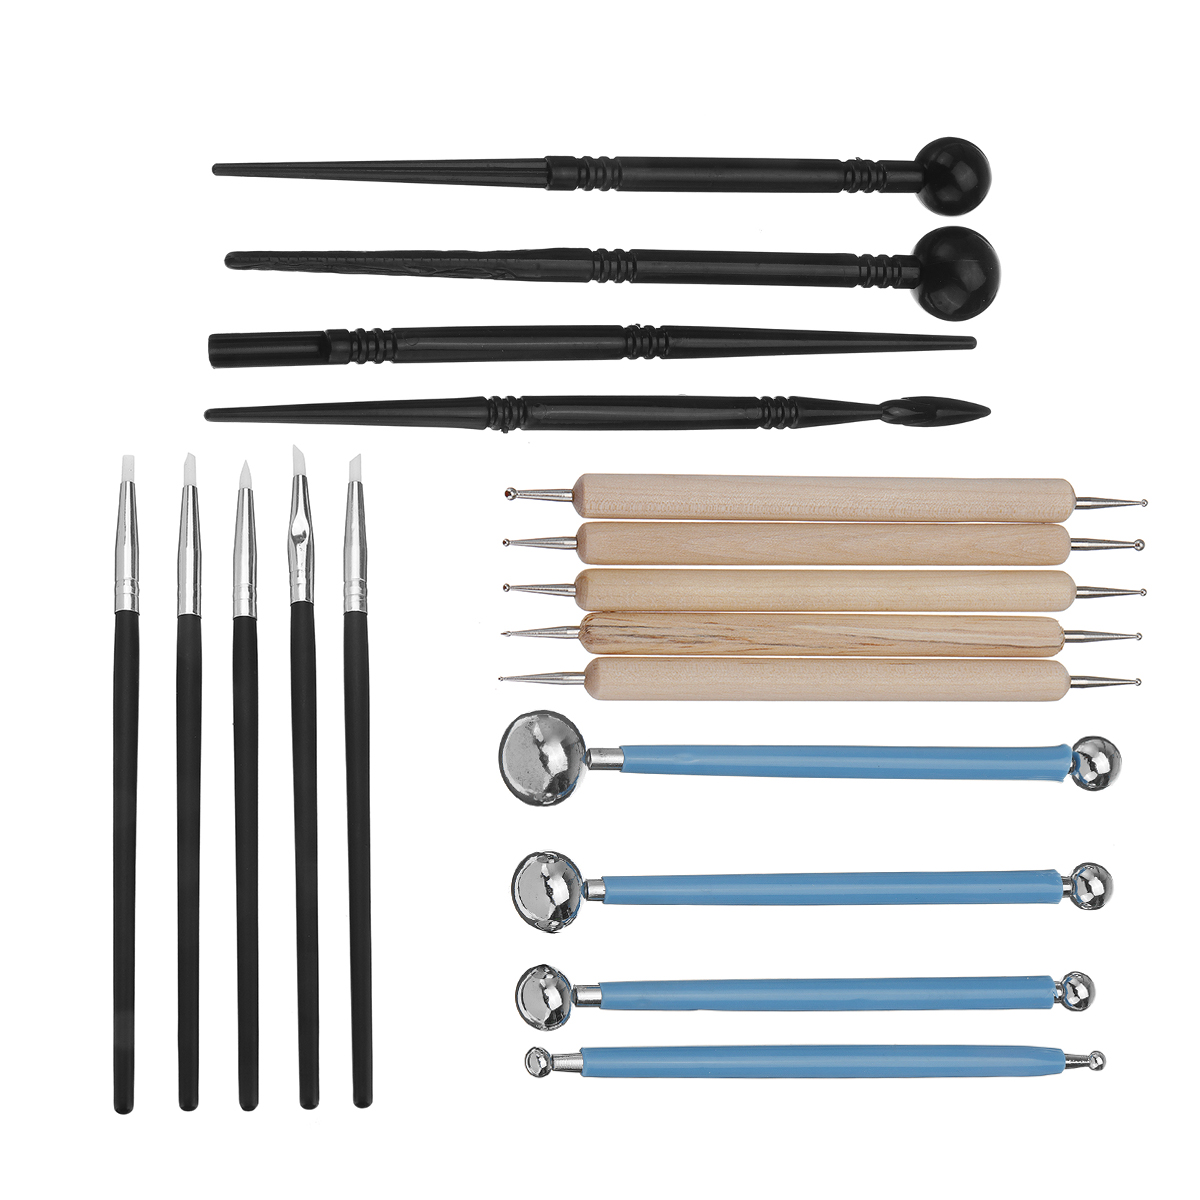 18-pcs-Professional-Polymer-Clay-Sculpting-Tools-Pottery-Models-Art-Projects-Kit-1533747-1